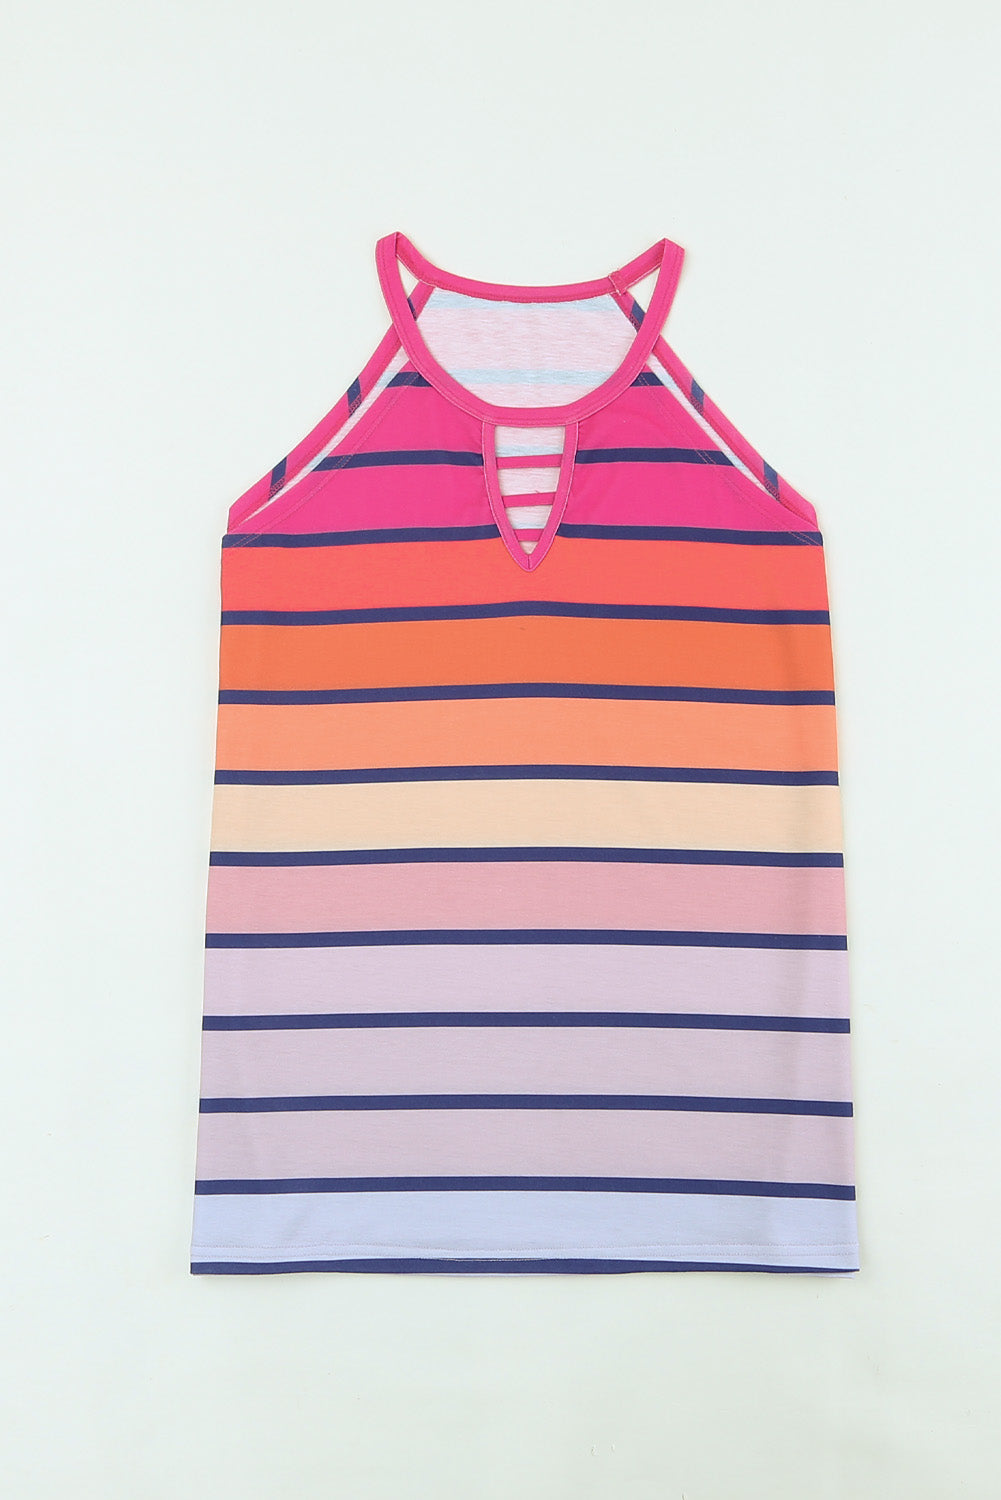 Multicolor Colorful Striped Hollow Out Camisole